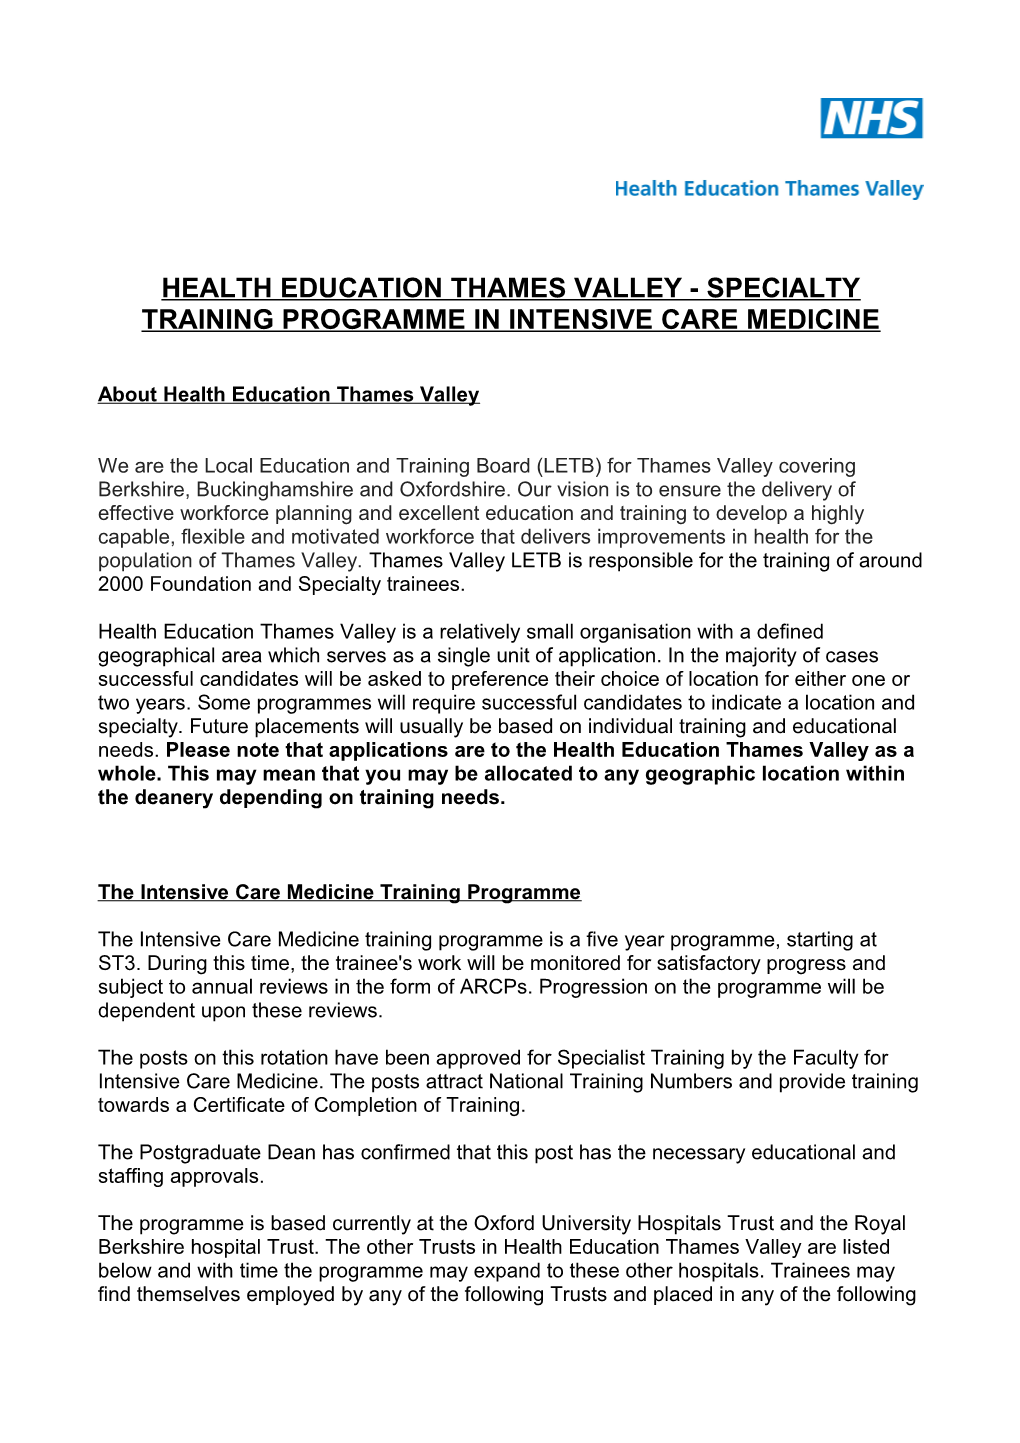 Health Education Thames Valley - Specialty Training Programme in Intensive Care Medicine